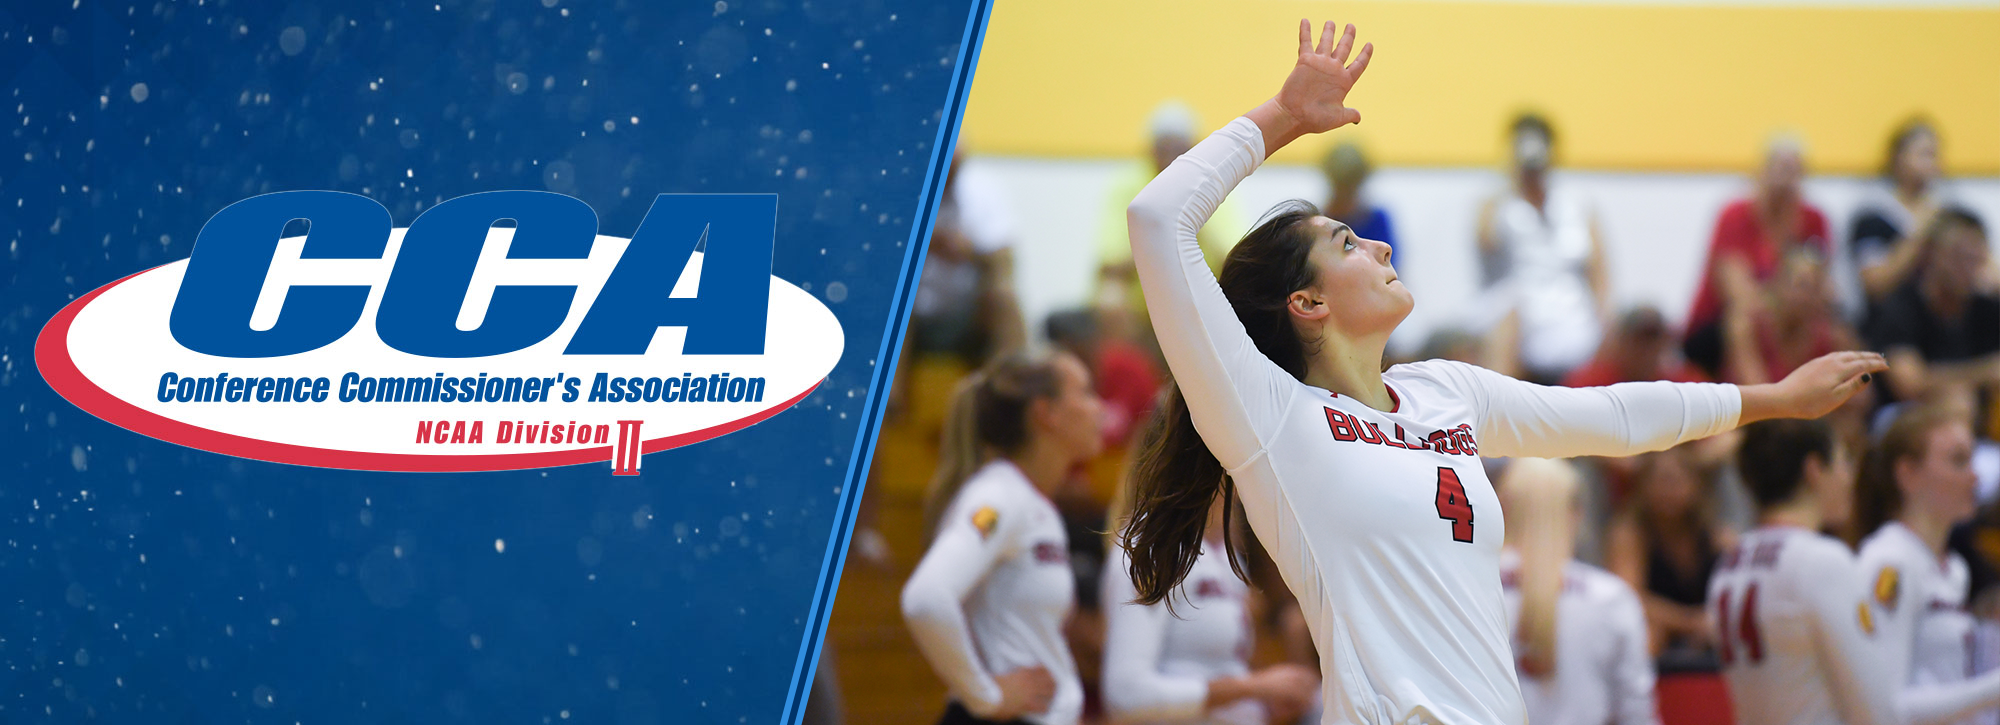 Ferris State's Cappel Selected D2CCA Midwest Region Player of the Year